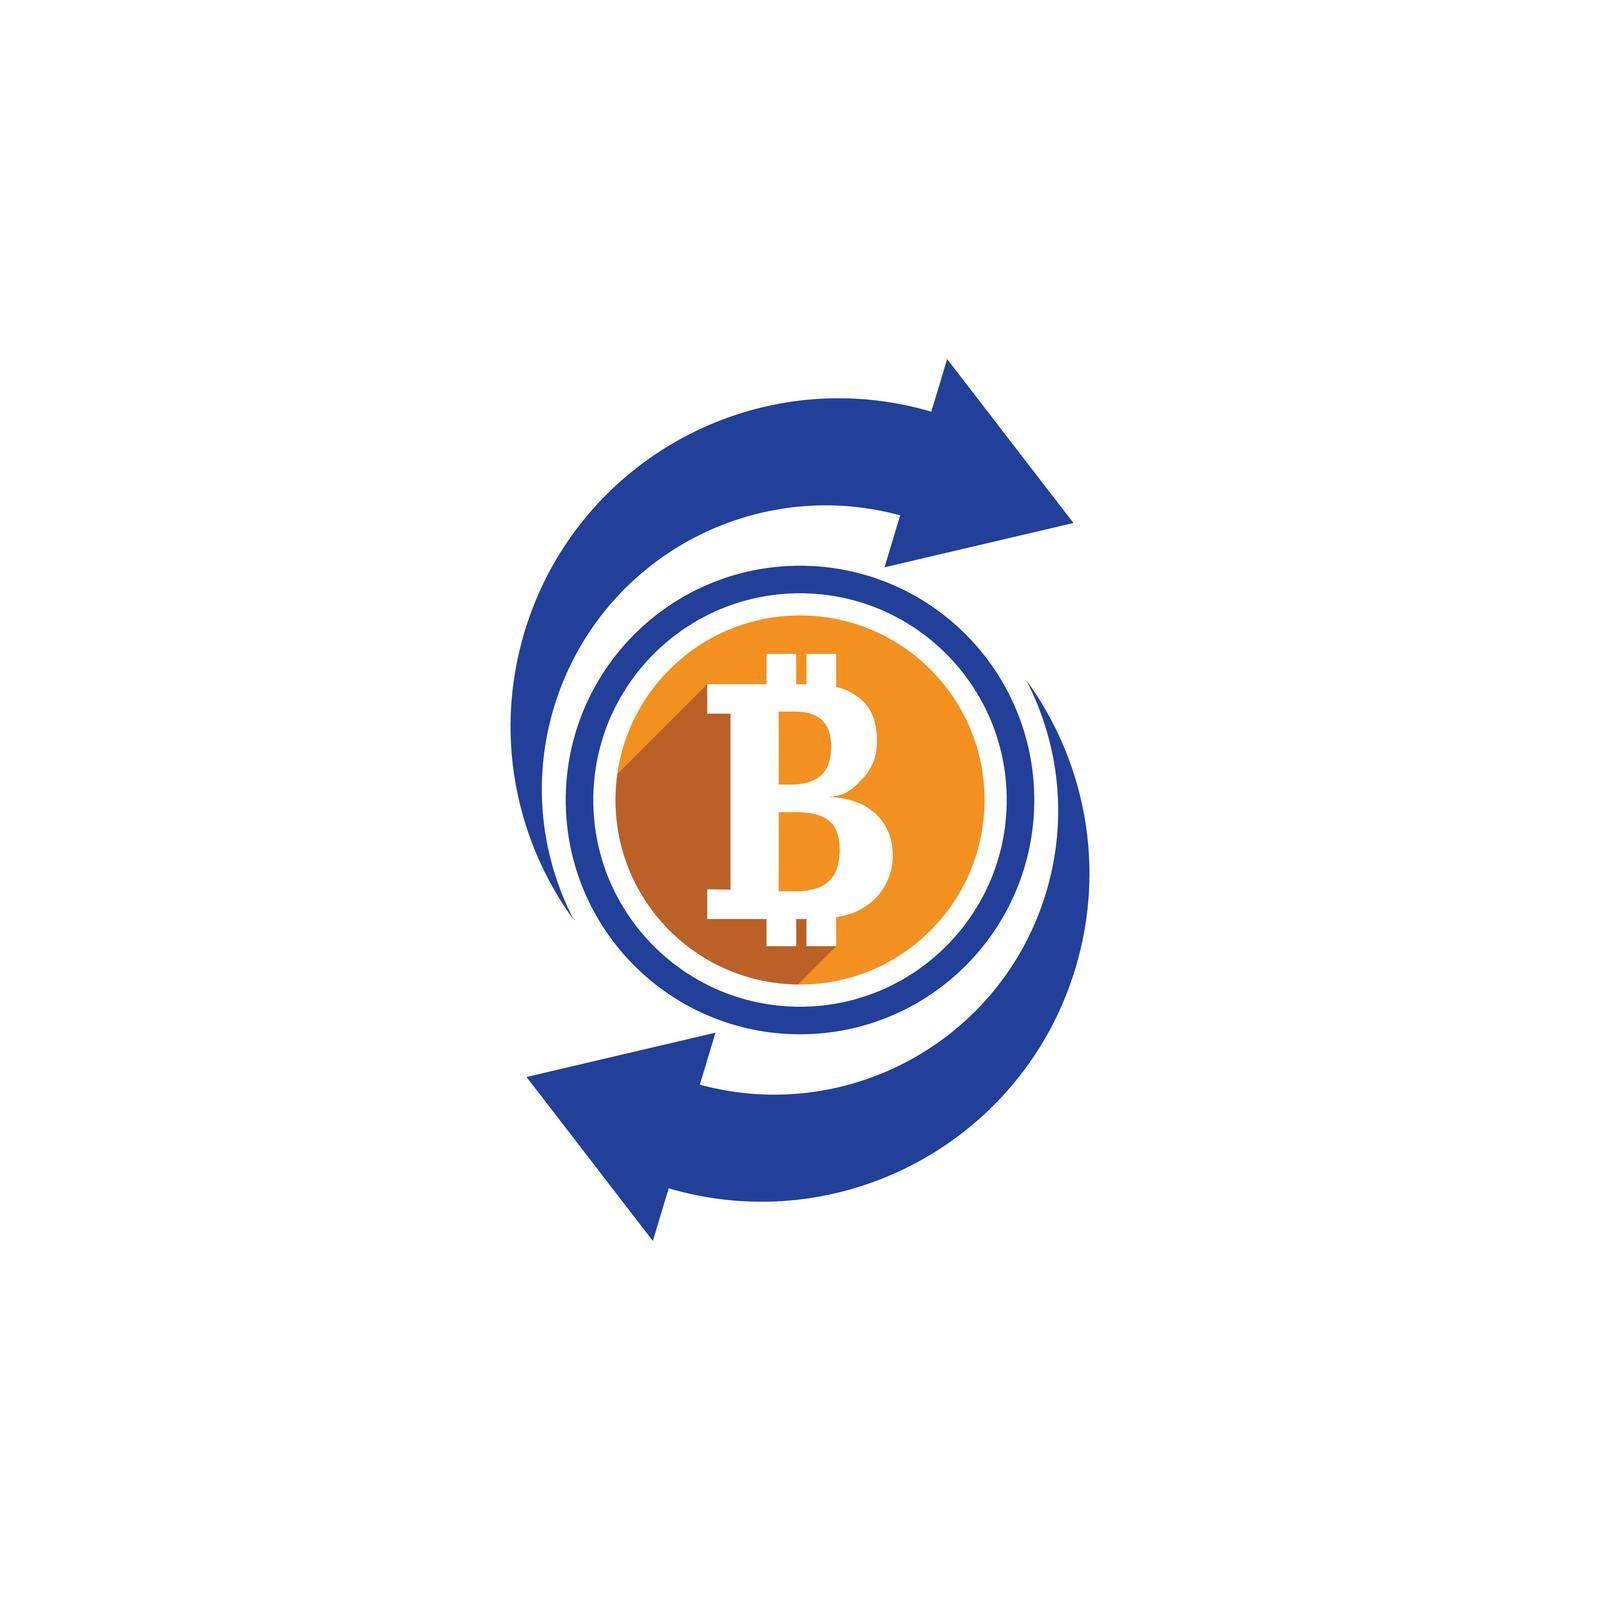 Bit coin icon template by awk